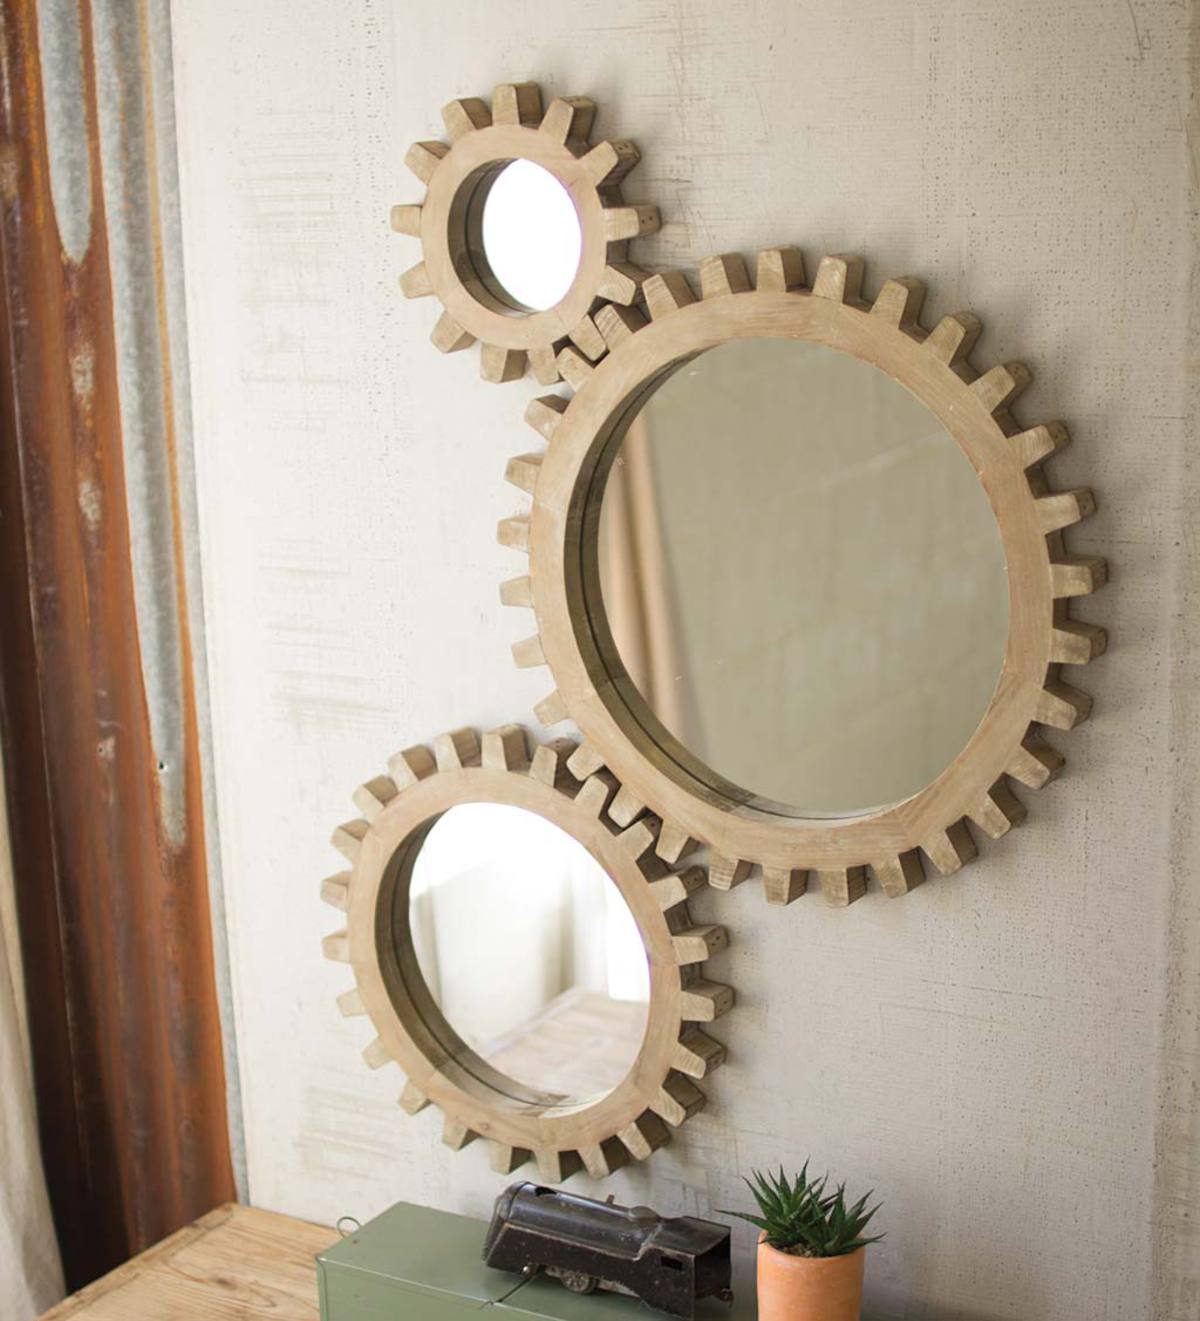 Wooden Gear-Shaped Mirrors, Set of 3